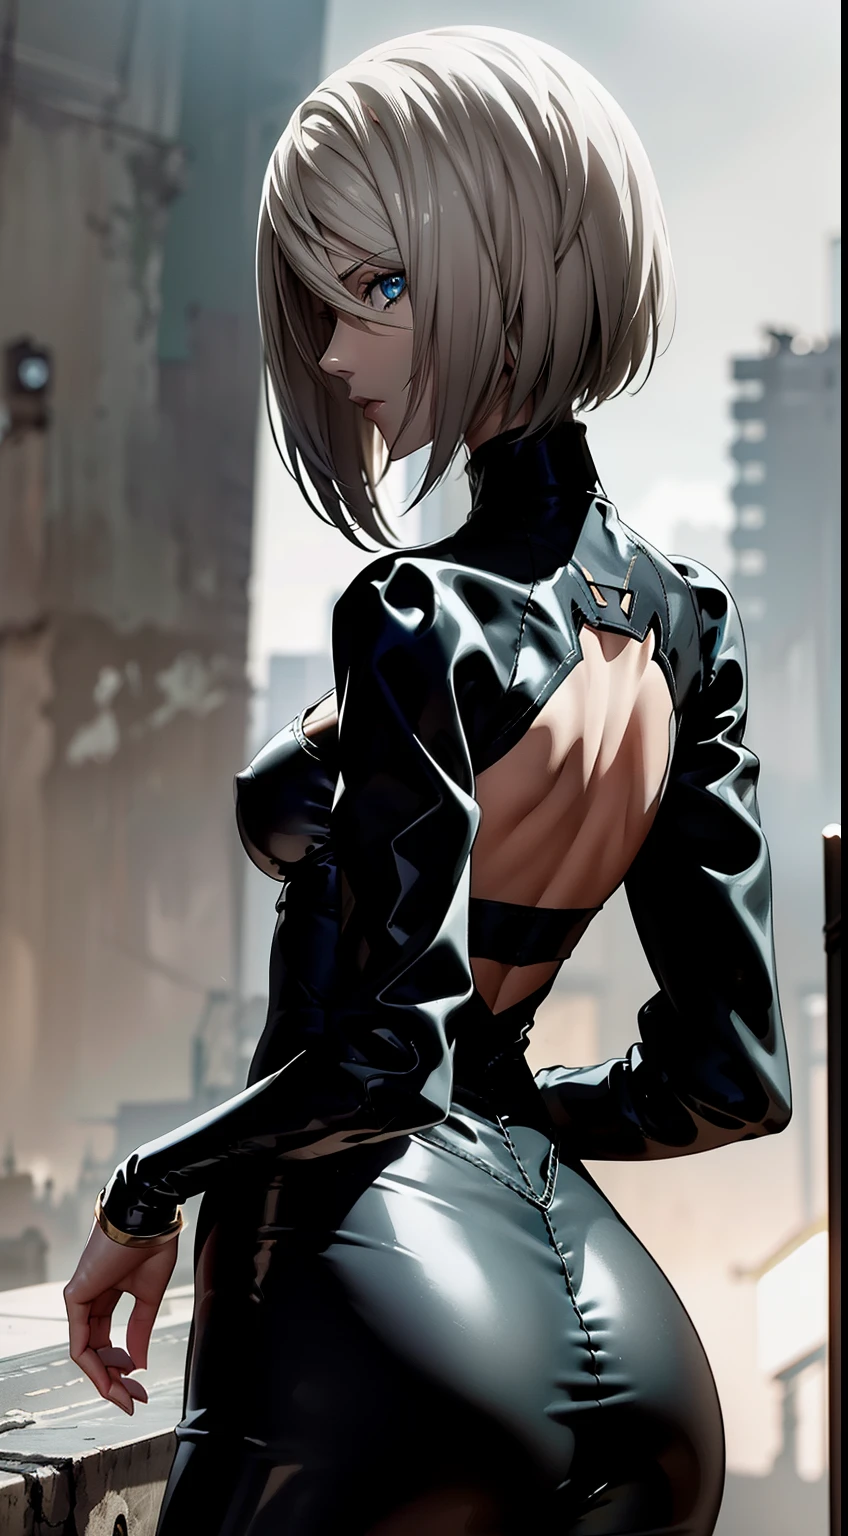 gloomy composition, gloomy background, Ruins, ruined city, Very detailed. stands on the edge of the roof, gloomy composition, The Gloomy Room, gloomy atmosphere, very detailed eyes, grey-blue eyes, Beautiful figure, night city, Cyberpunk city, very detailed eyes, Beautiful figure, Lucy from the anime series Cyberpunk Edge Runner, a 1girl, facing the viewer, Beautiful figure (Proper Anatopy 1.1.), in full height (Body Full 1.1), Slim, Slender figure, Slender figure, shapely legs, Anime style, white colored hair, white colored hair, that disappear at the ends, Bob hairstyle, short white jacket, tight black suit, Cutouts on the shoulders, Cutouts on the chest, Neckline at the waist, Skinny black leather pants, Very detailed face, Very beautiful face, Very sexy ass, in full height (Body Full 1.1), small elastic breasts, Little ass, Beautiful slim figure, small buttocks, Light, femininity，tmasterpiece，beste-Qualit，higly detailed，Visible to the feet， 8K resolution， High Sharp， 8K resolution， higly detailed， 8K UHD， Professional lighting， Photon mapping，physical based rendering， a perfect face， detailed face and body， ray traced， expressive look， Cinmatic Lighting，elastic small breasts, Heightened sexuality，